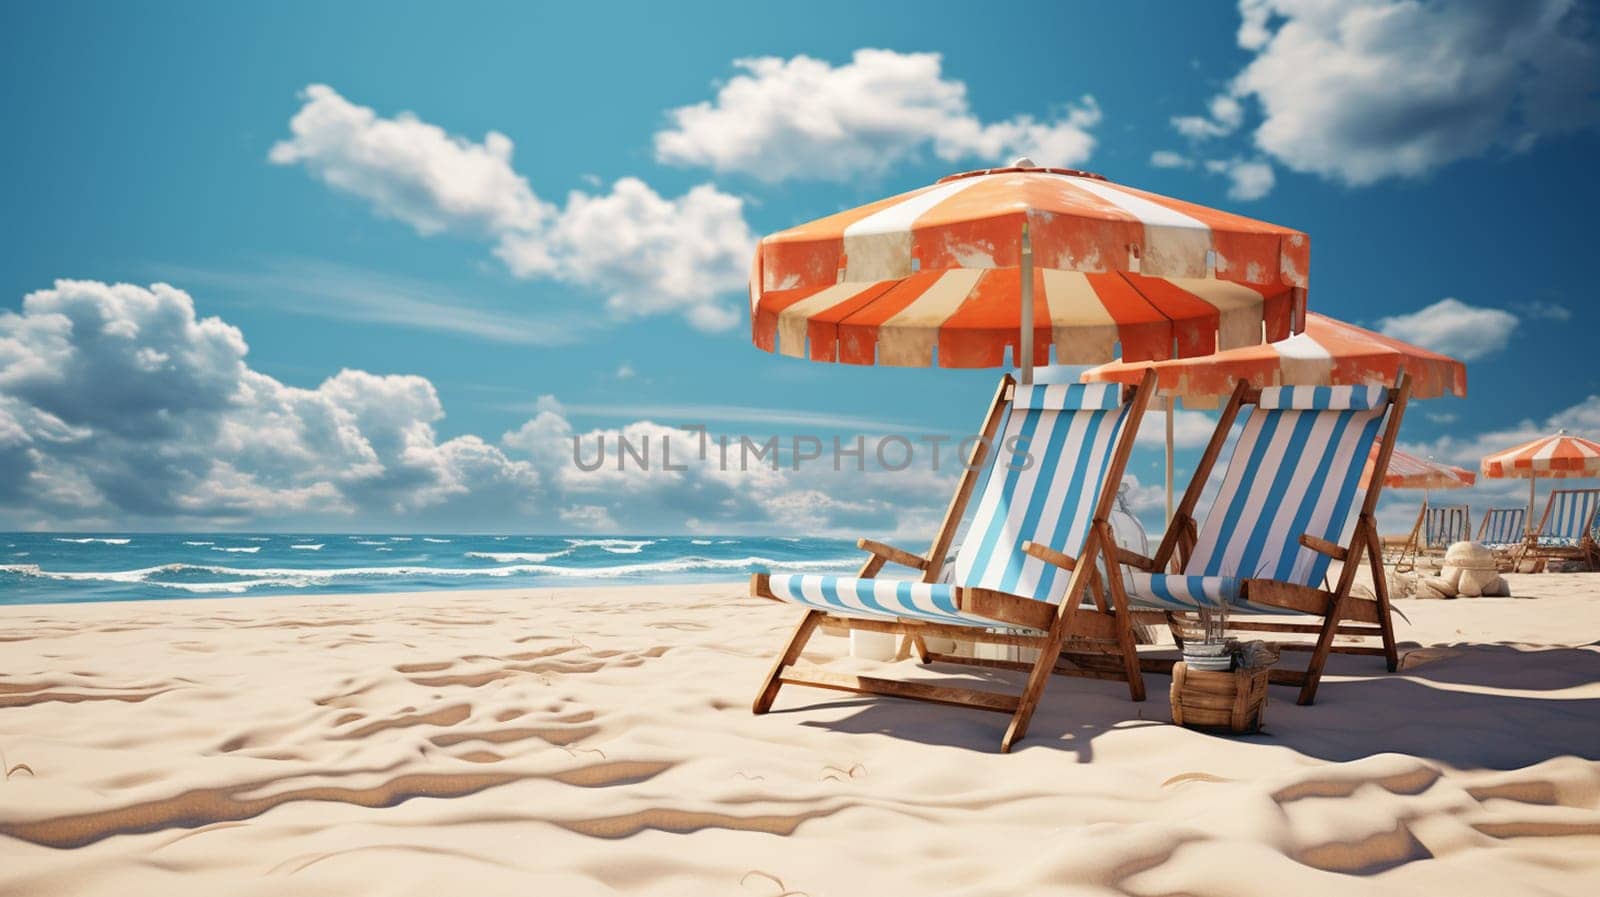 Seascape beautiful view and Canvas bed and umbrella on the beach for sunbathing, watercolor painting background concept. by Andelov13